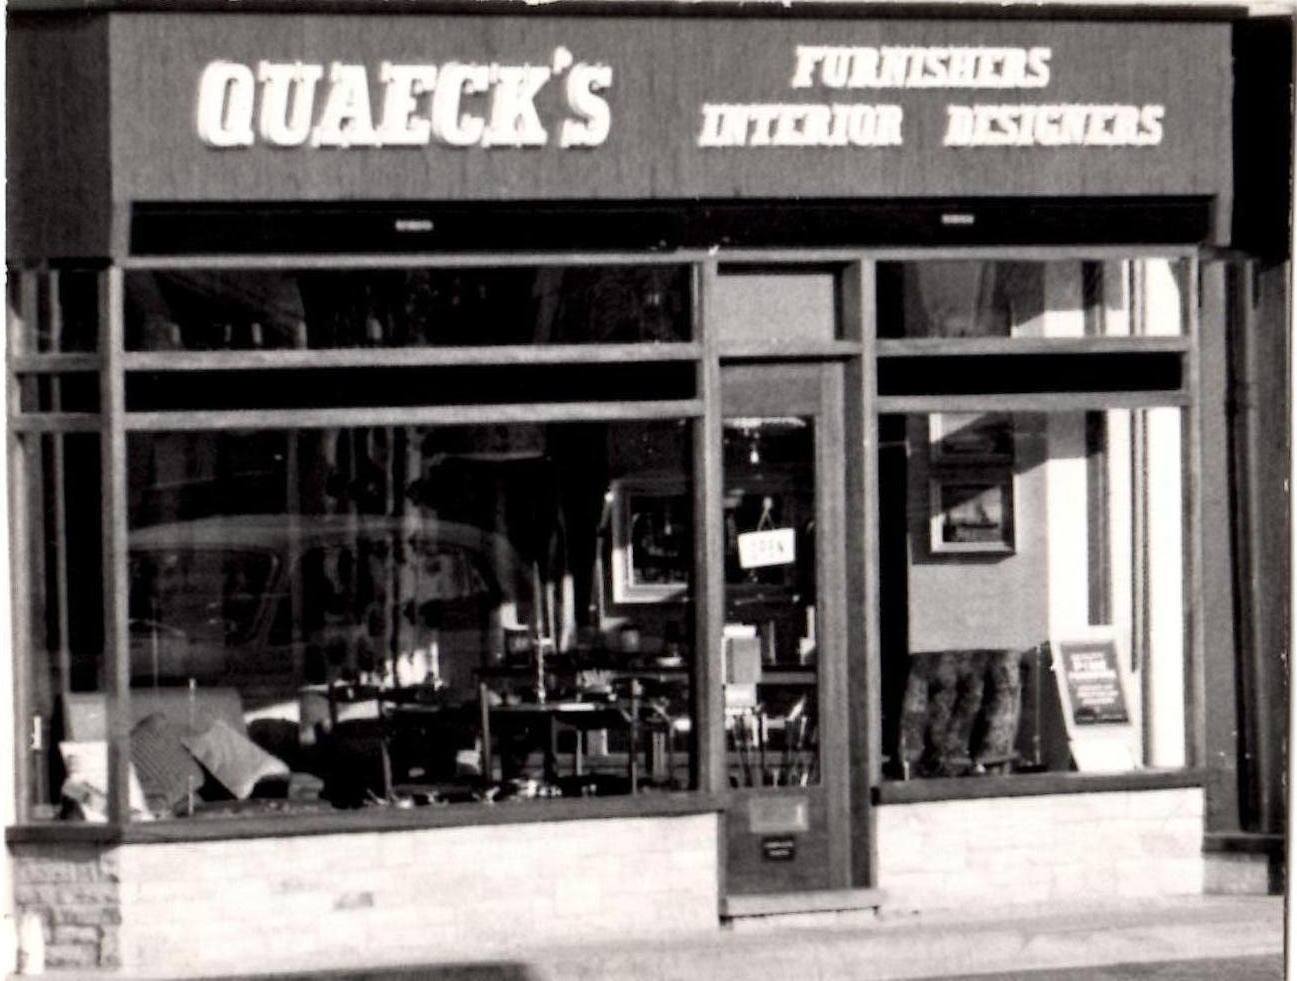 Quaeck's 150 High Street in the early days